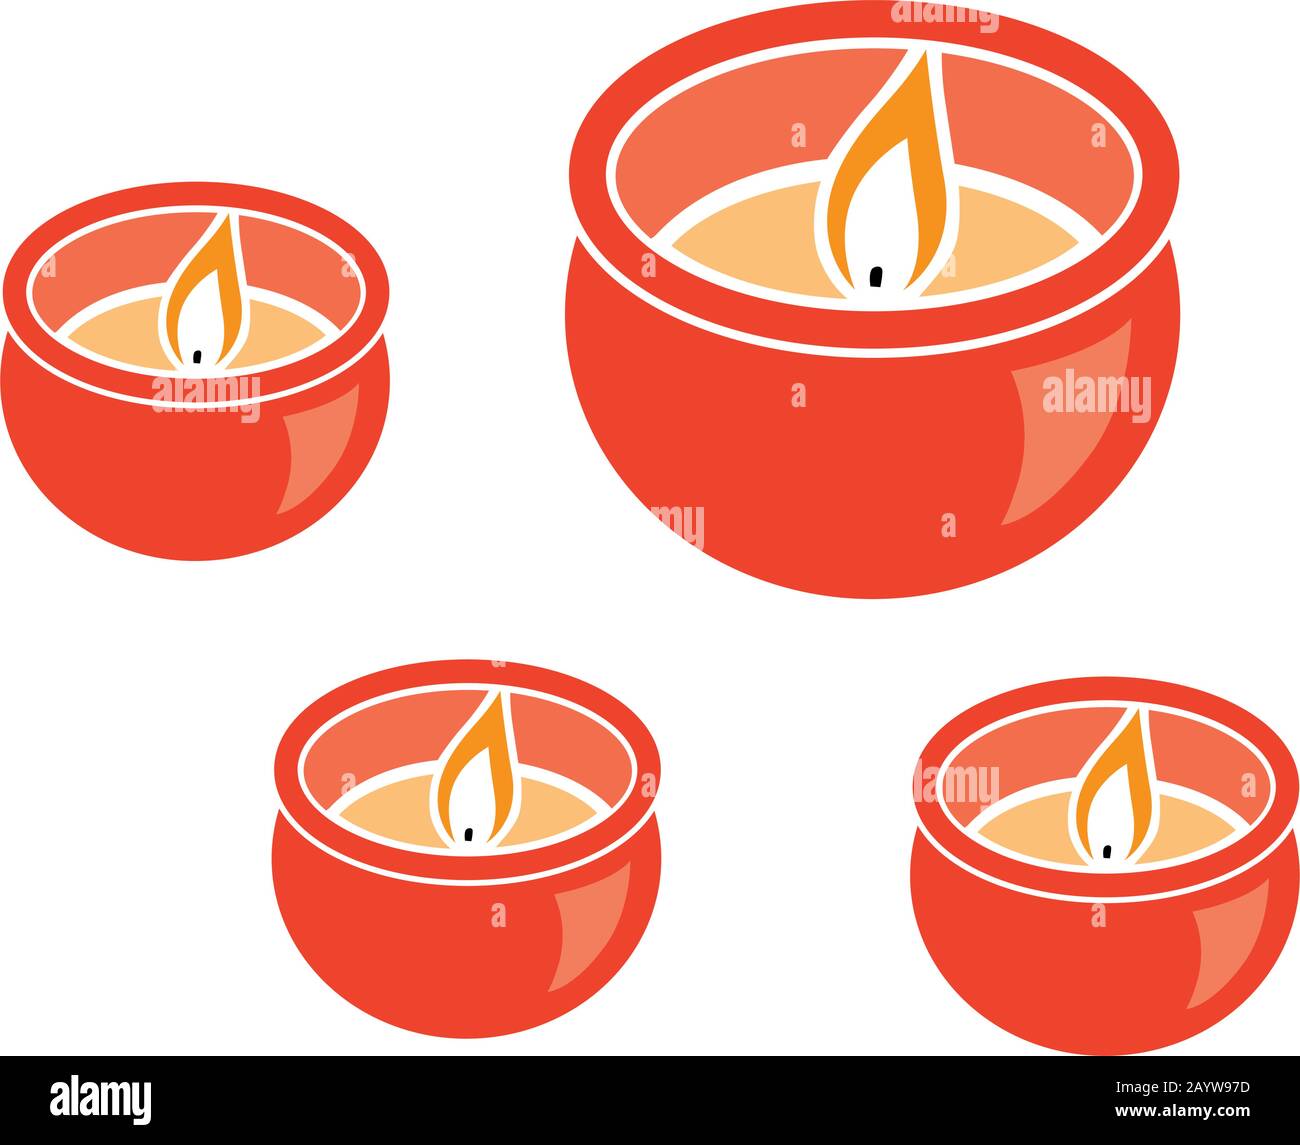 candles, vector graphic design element Stock Vector